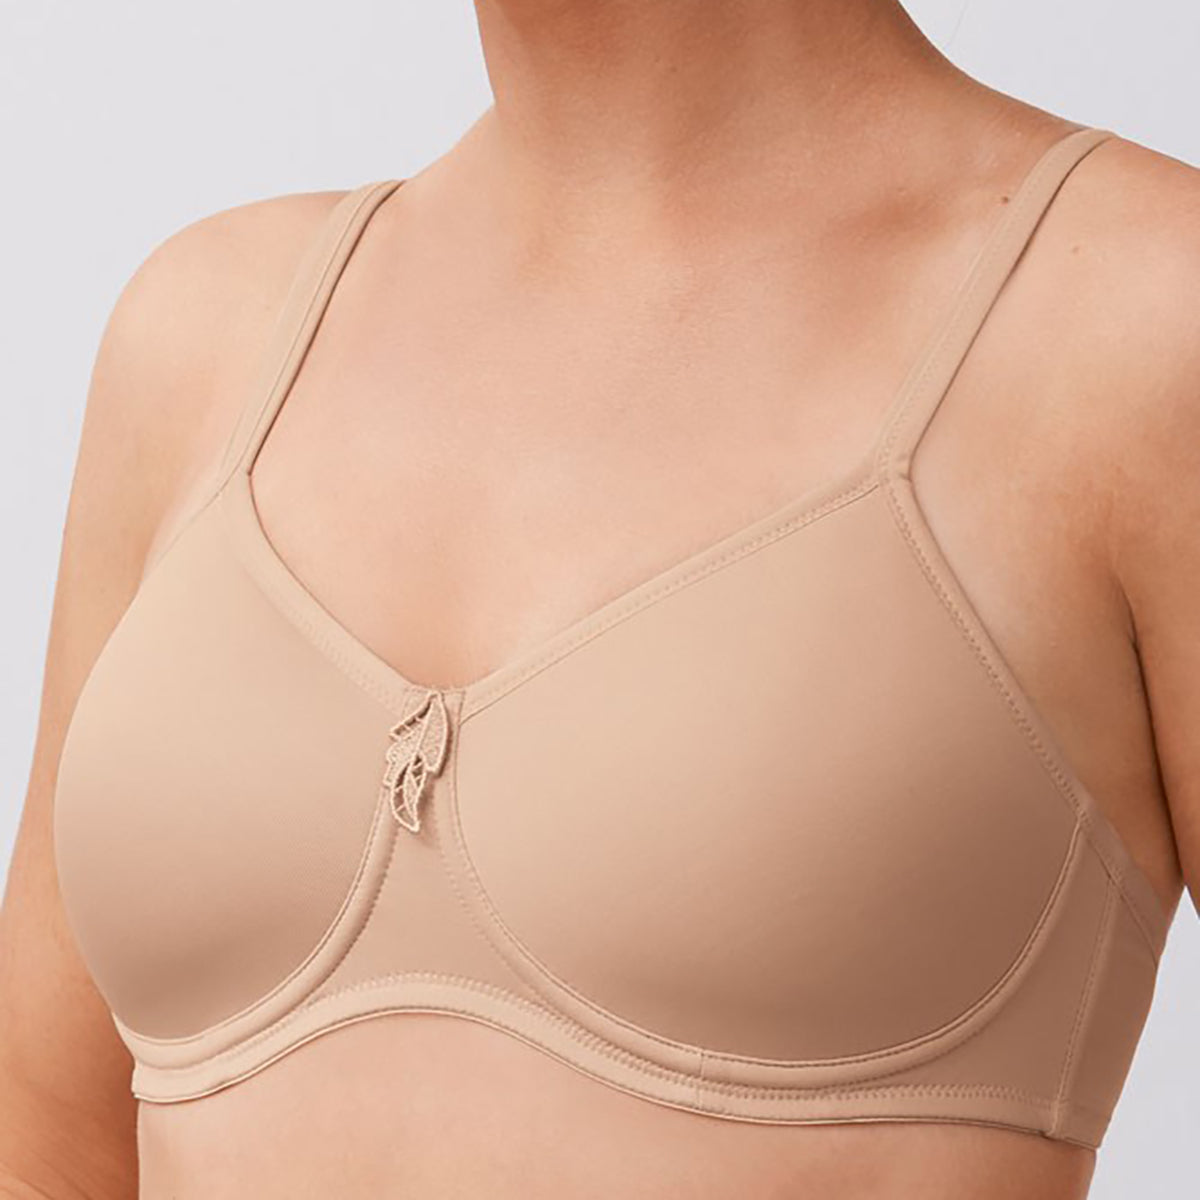 Amoena Annabell Non-wired Mastectomy Bra 2126 Various Sizes & Colors NWT